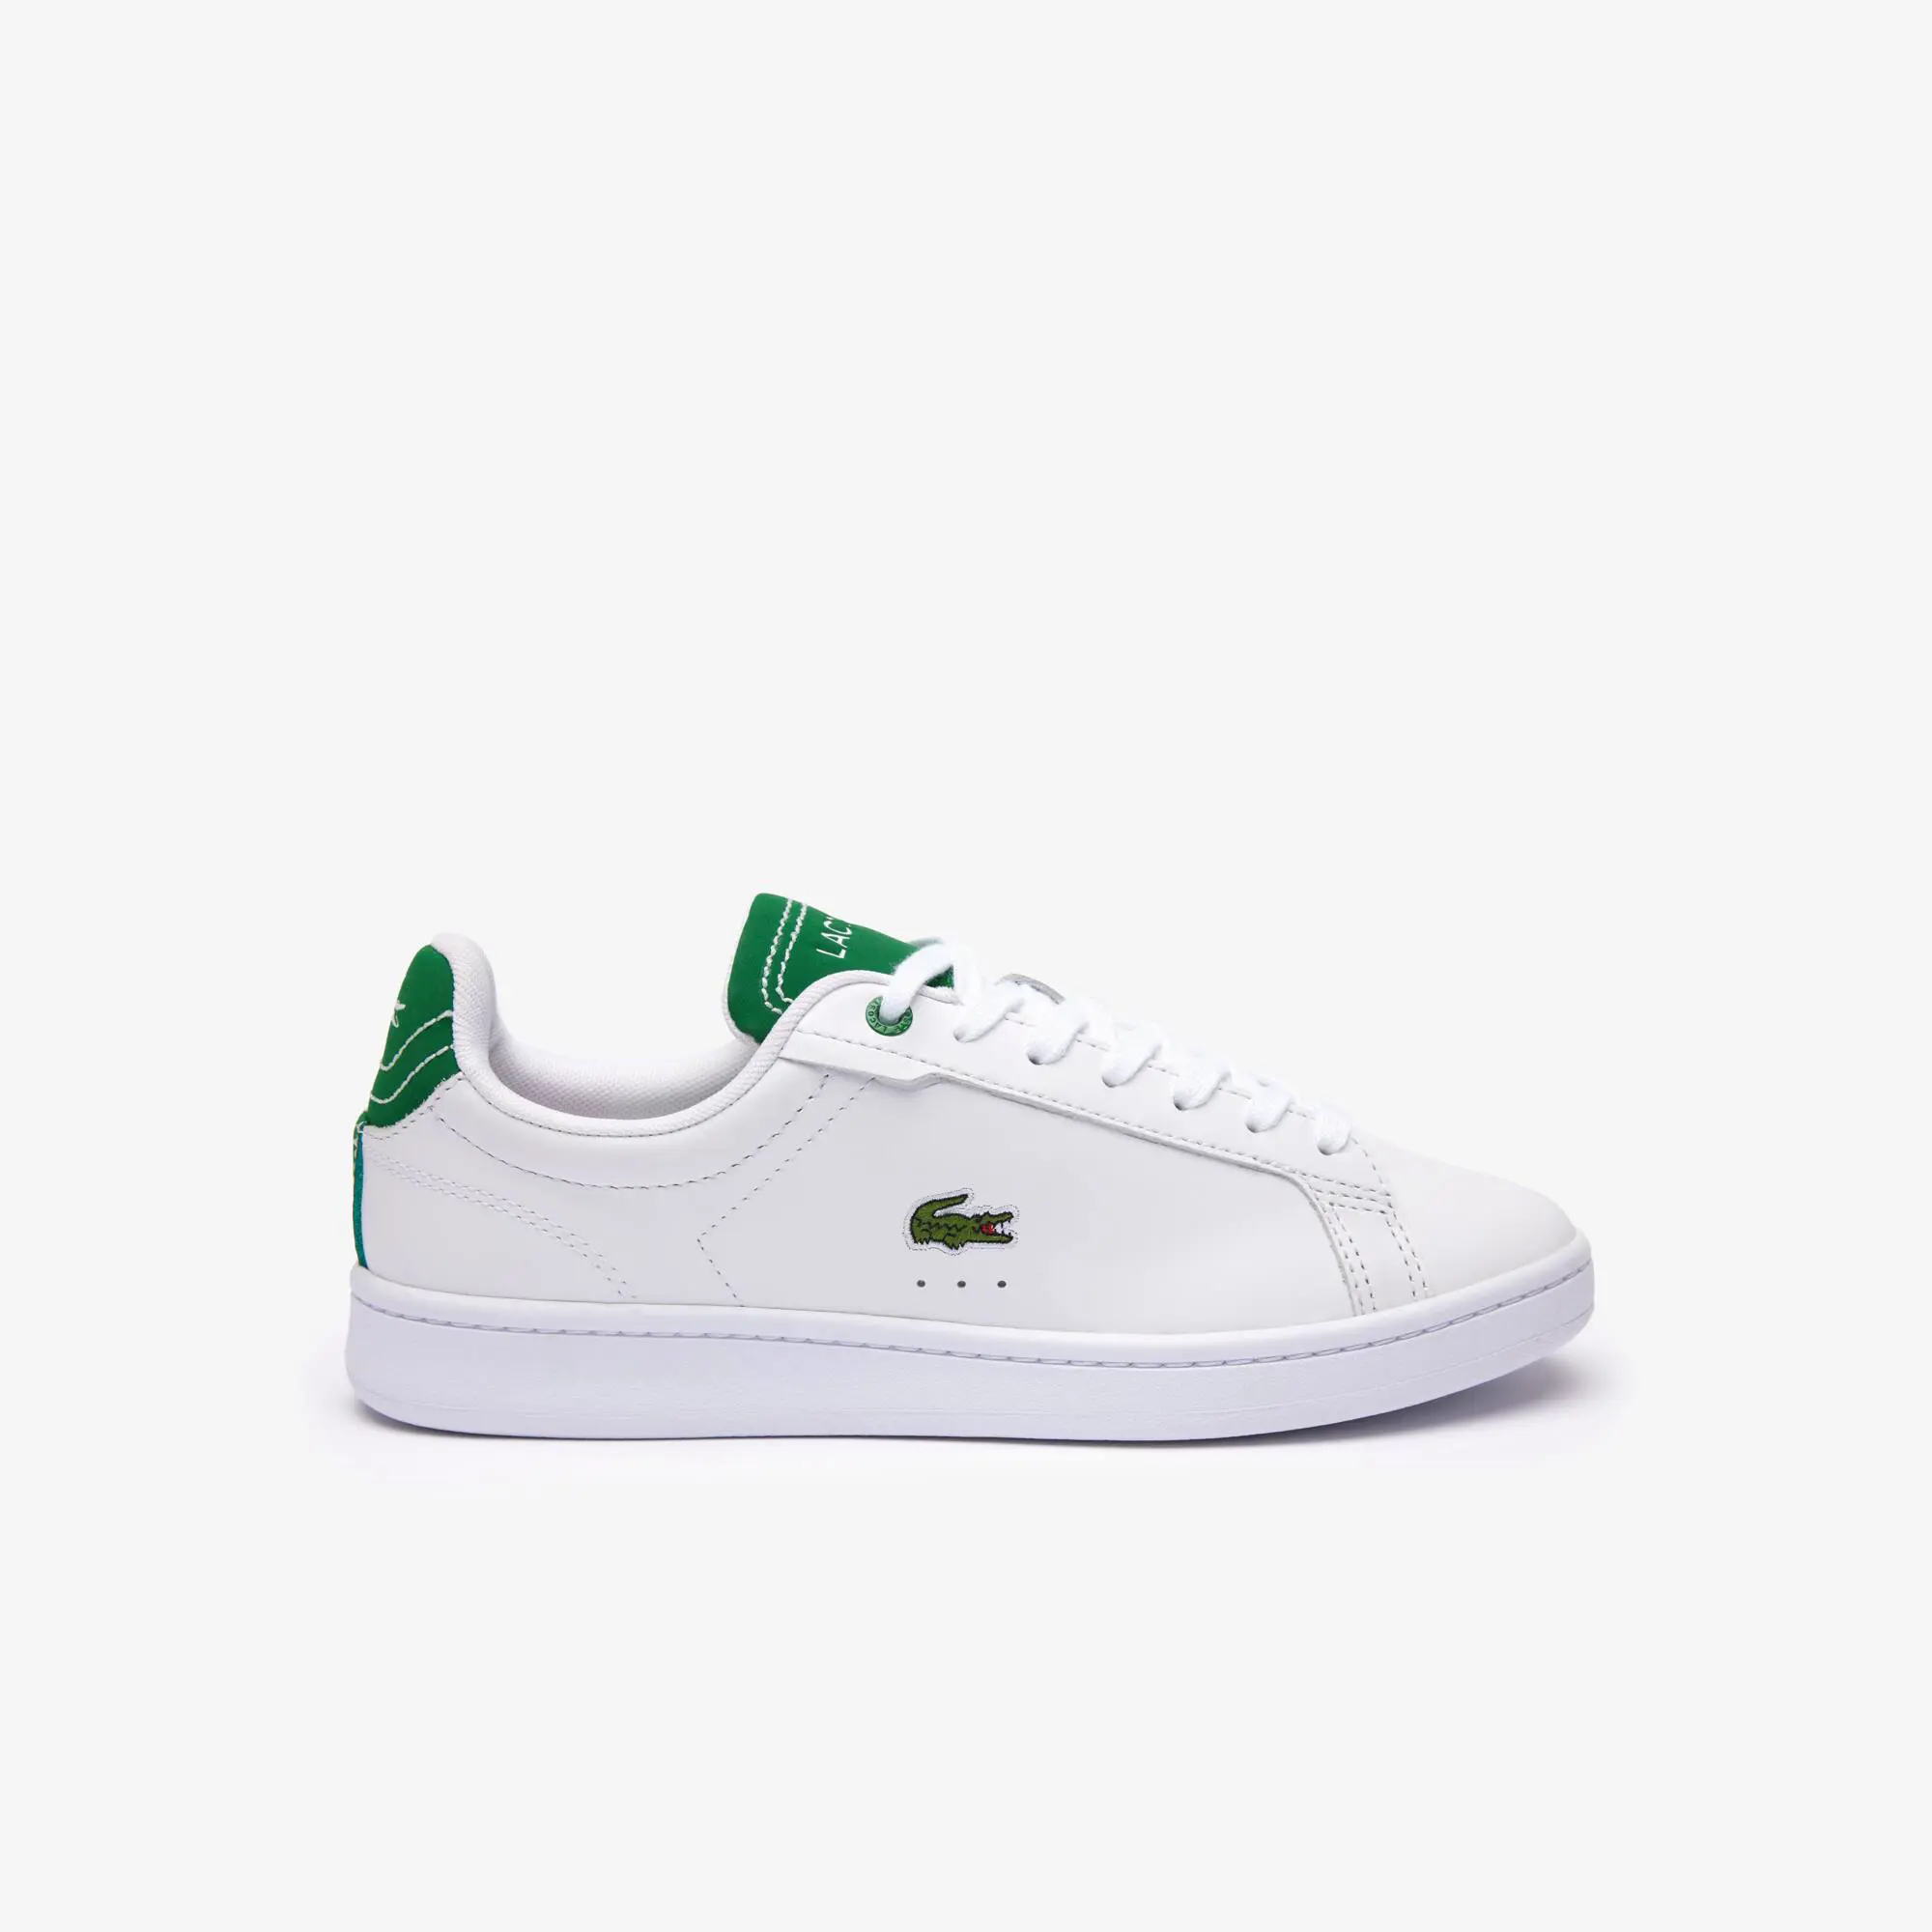 Lacoste Women's Contrast Leather Carnaby Pro Sneakers. 1